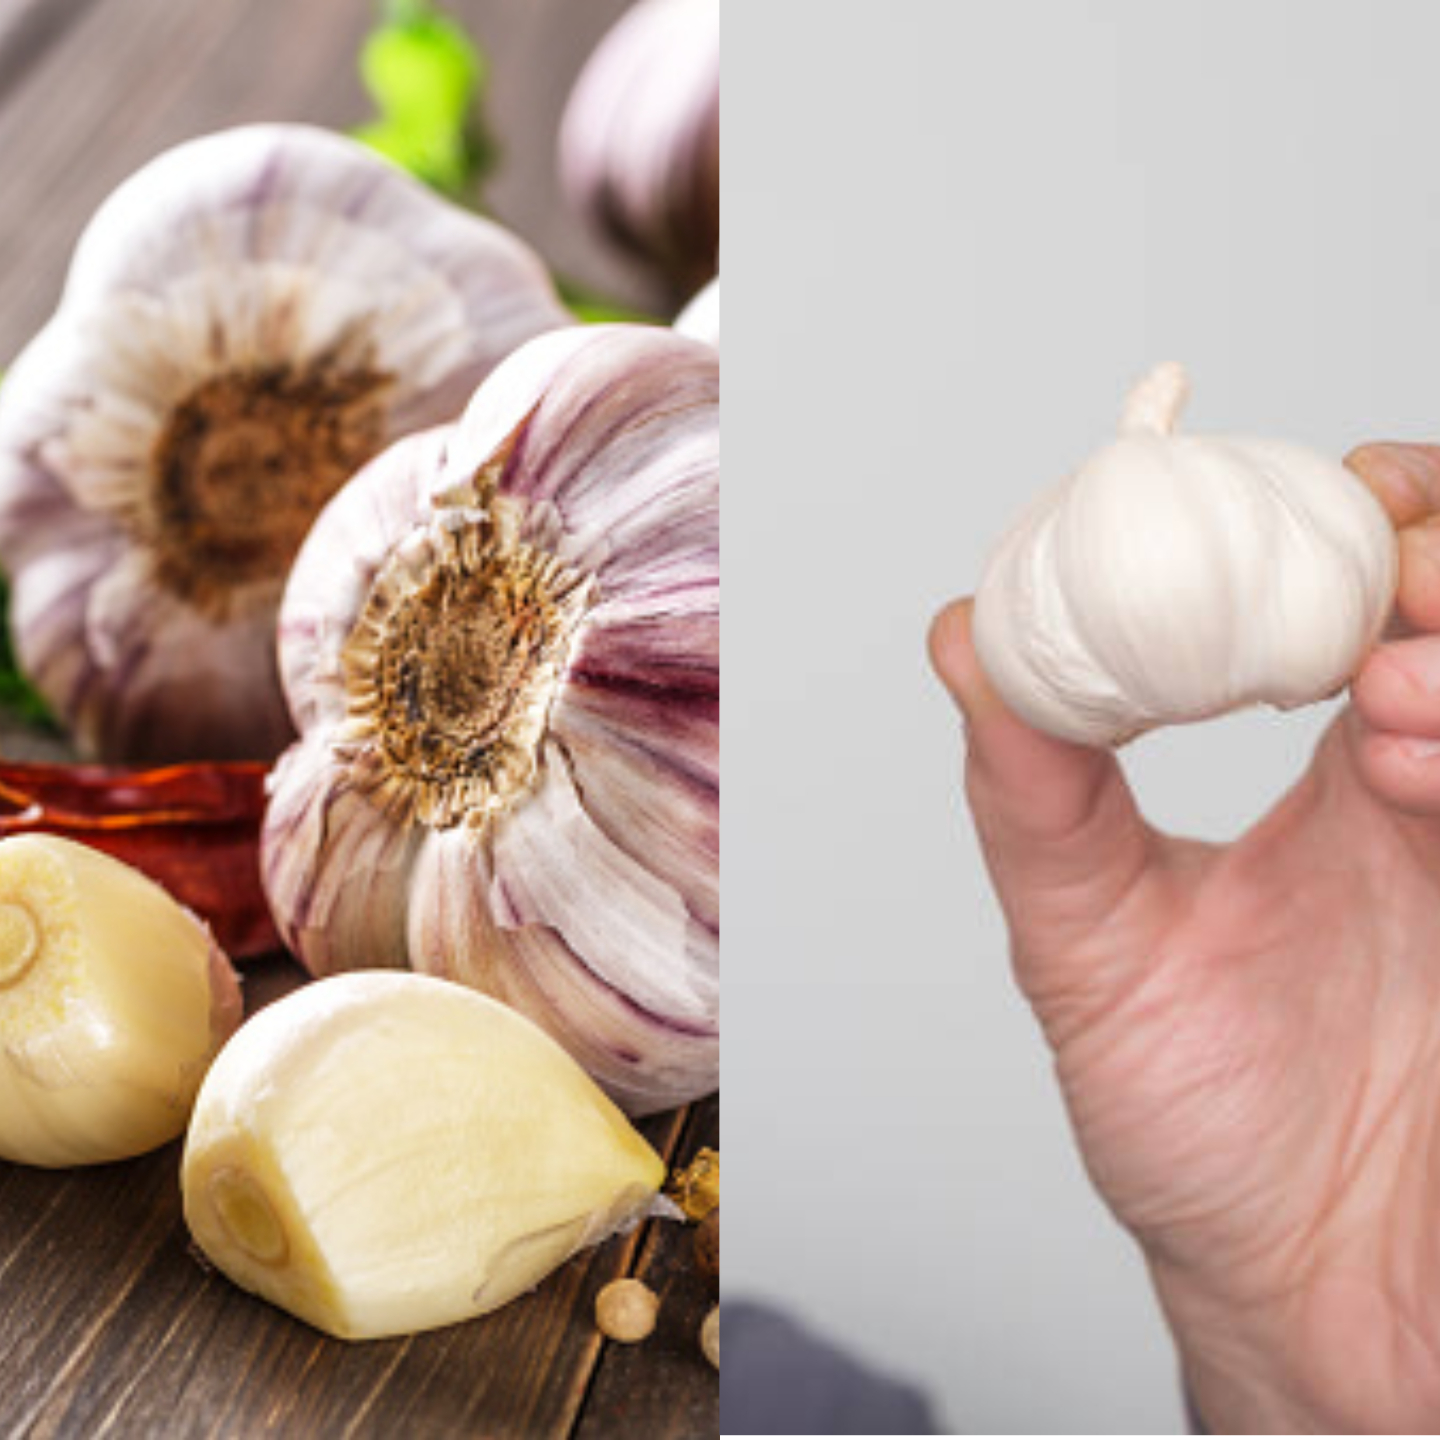 Add Garlic To Your Daily Diet